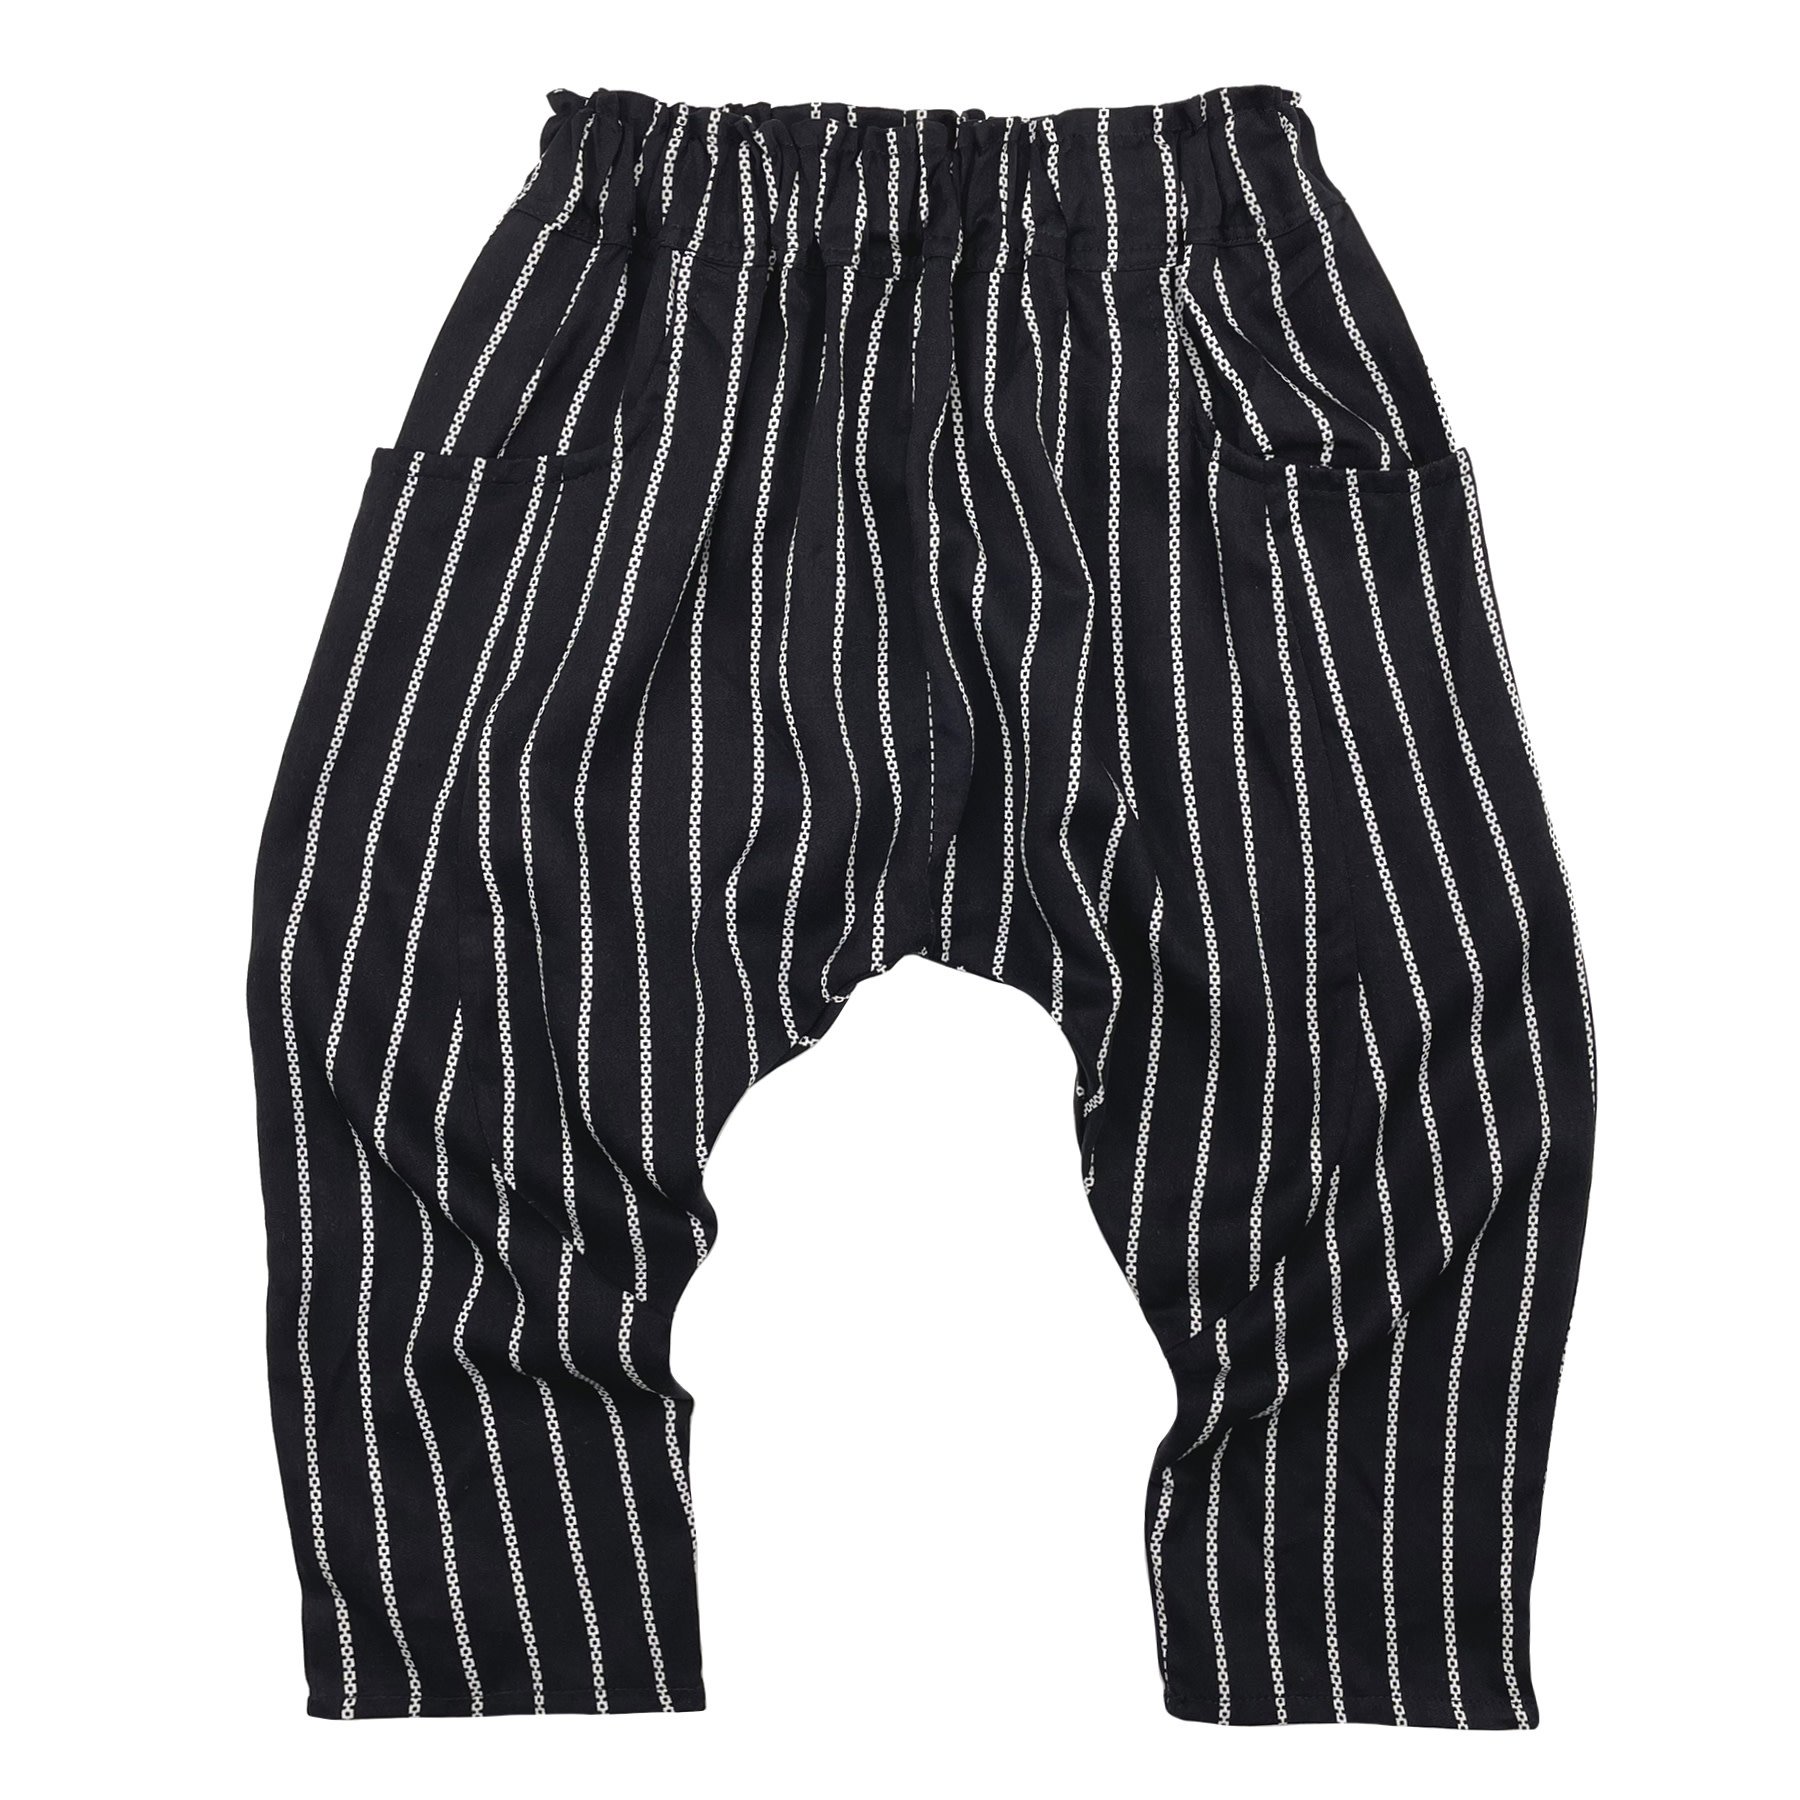 Stay Rowdy Striped Pants